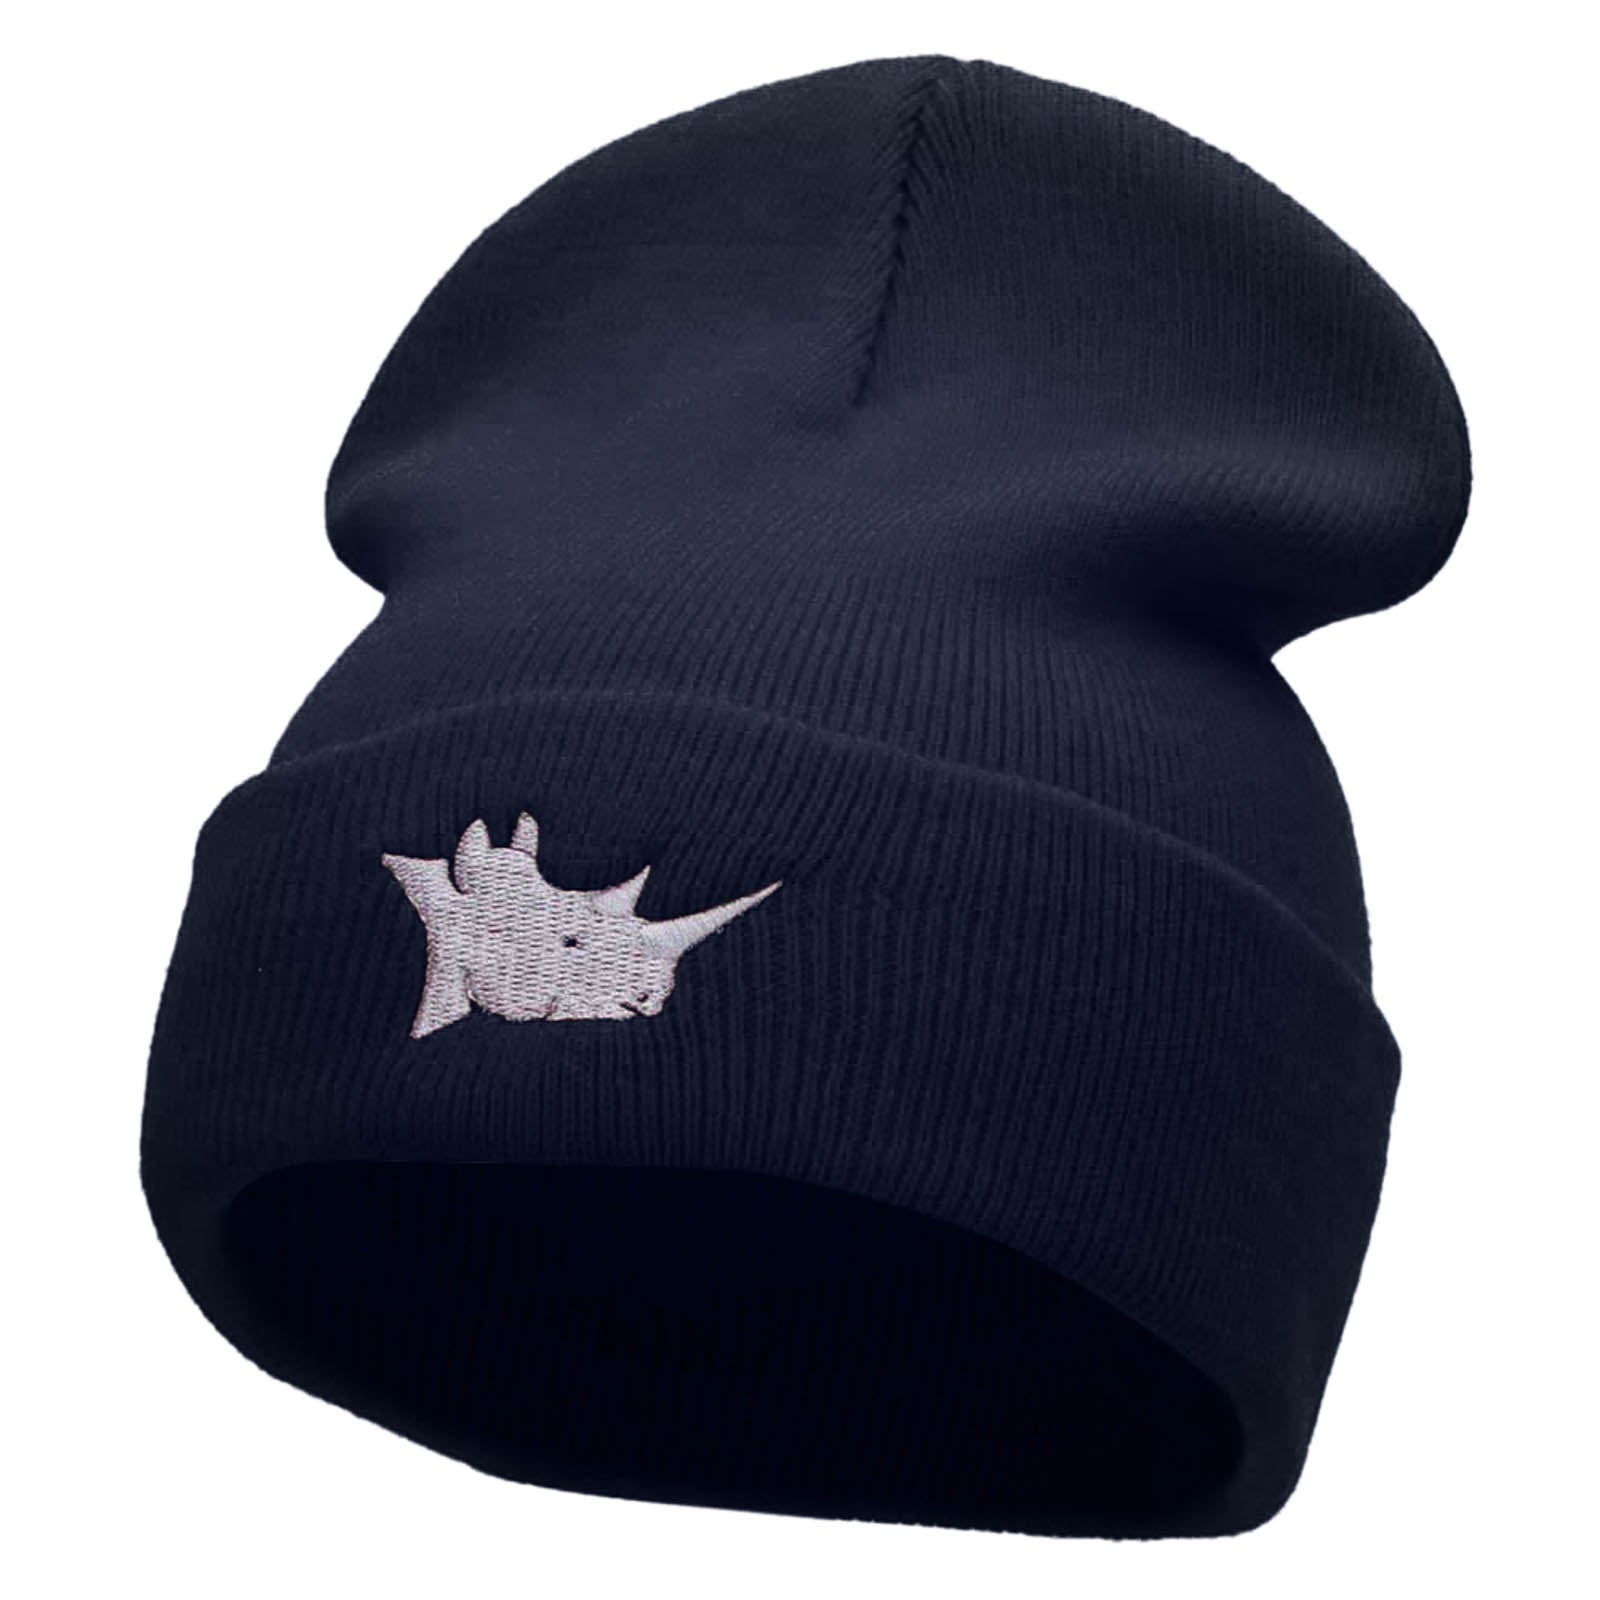 Rhino Head Embroidered 12 Inch Long Knitted Beanie - Navy OSFM